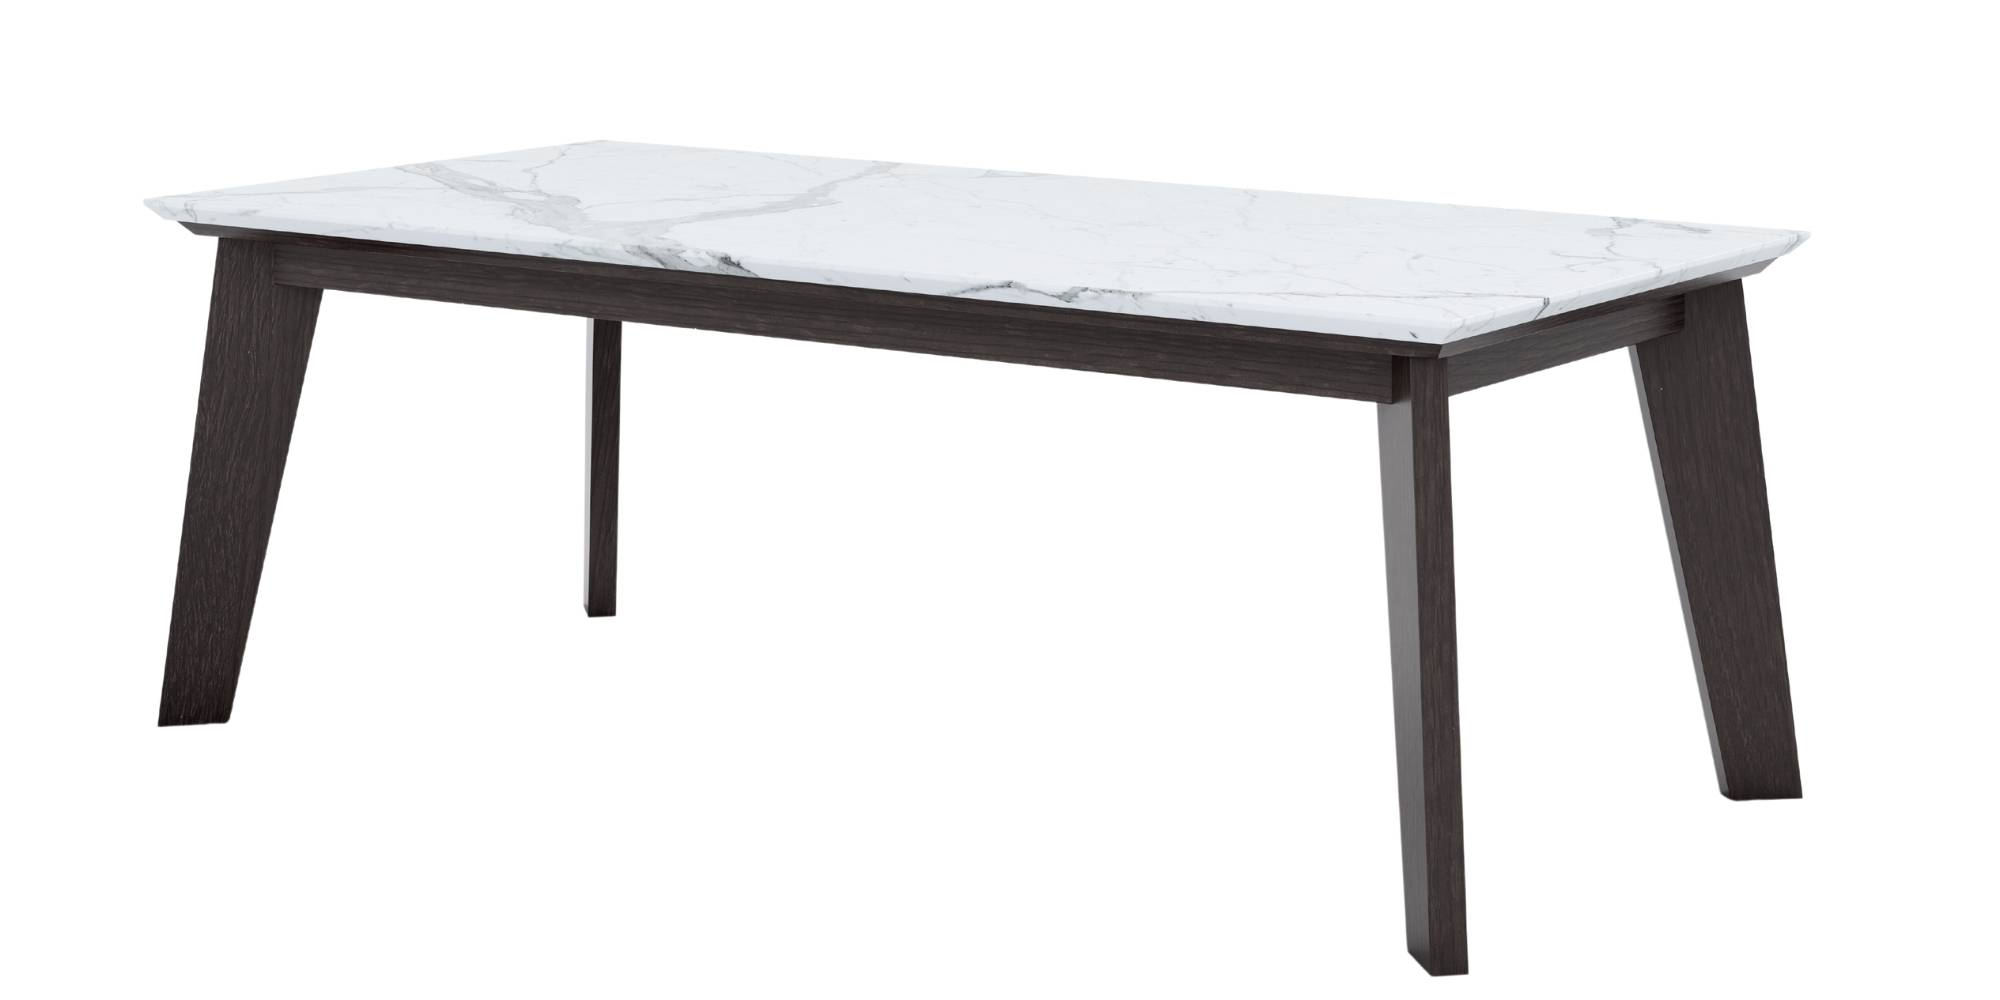 Perseus Porcelain Oval Dining Table in Outdoor Tables Dining Tables for Asteri collection